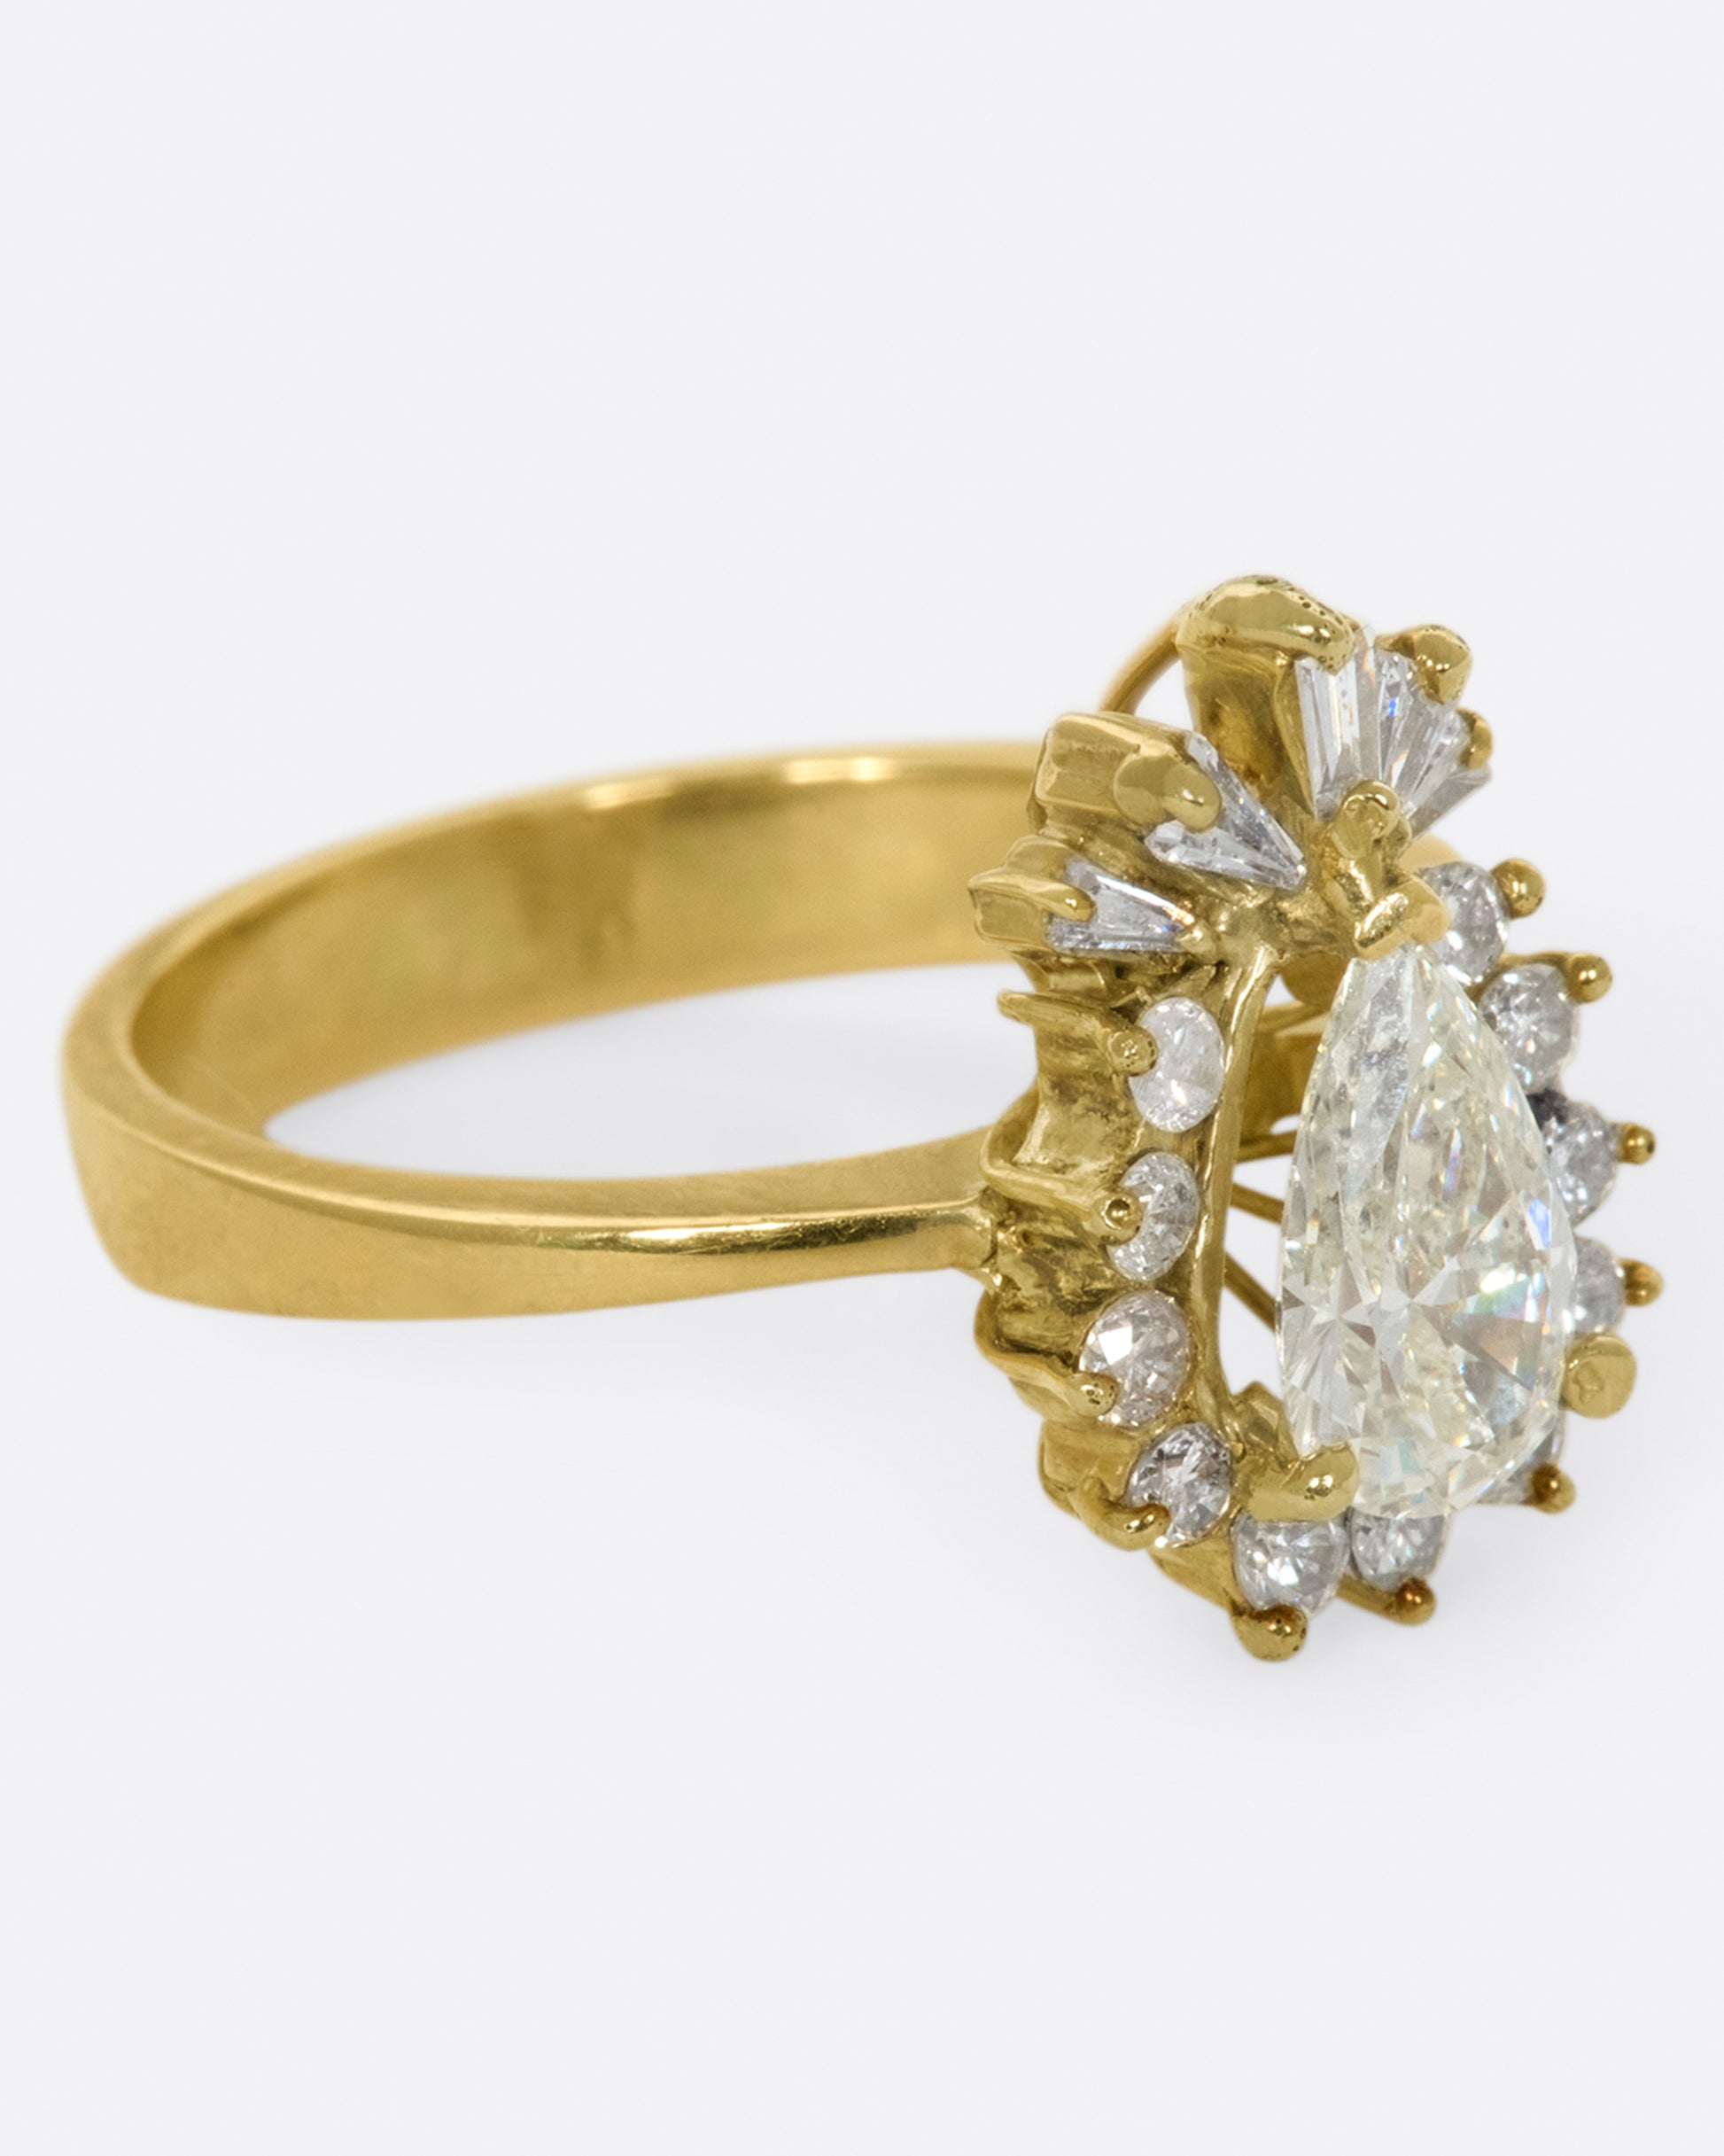 A tapered ring with a pale yellow, pear shaped diamond at its center with a round and baguette diamond halo.